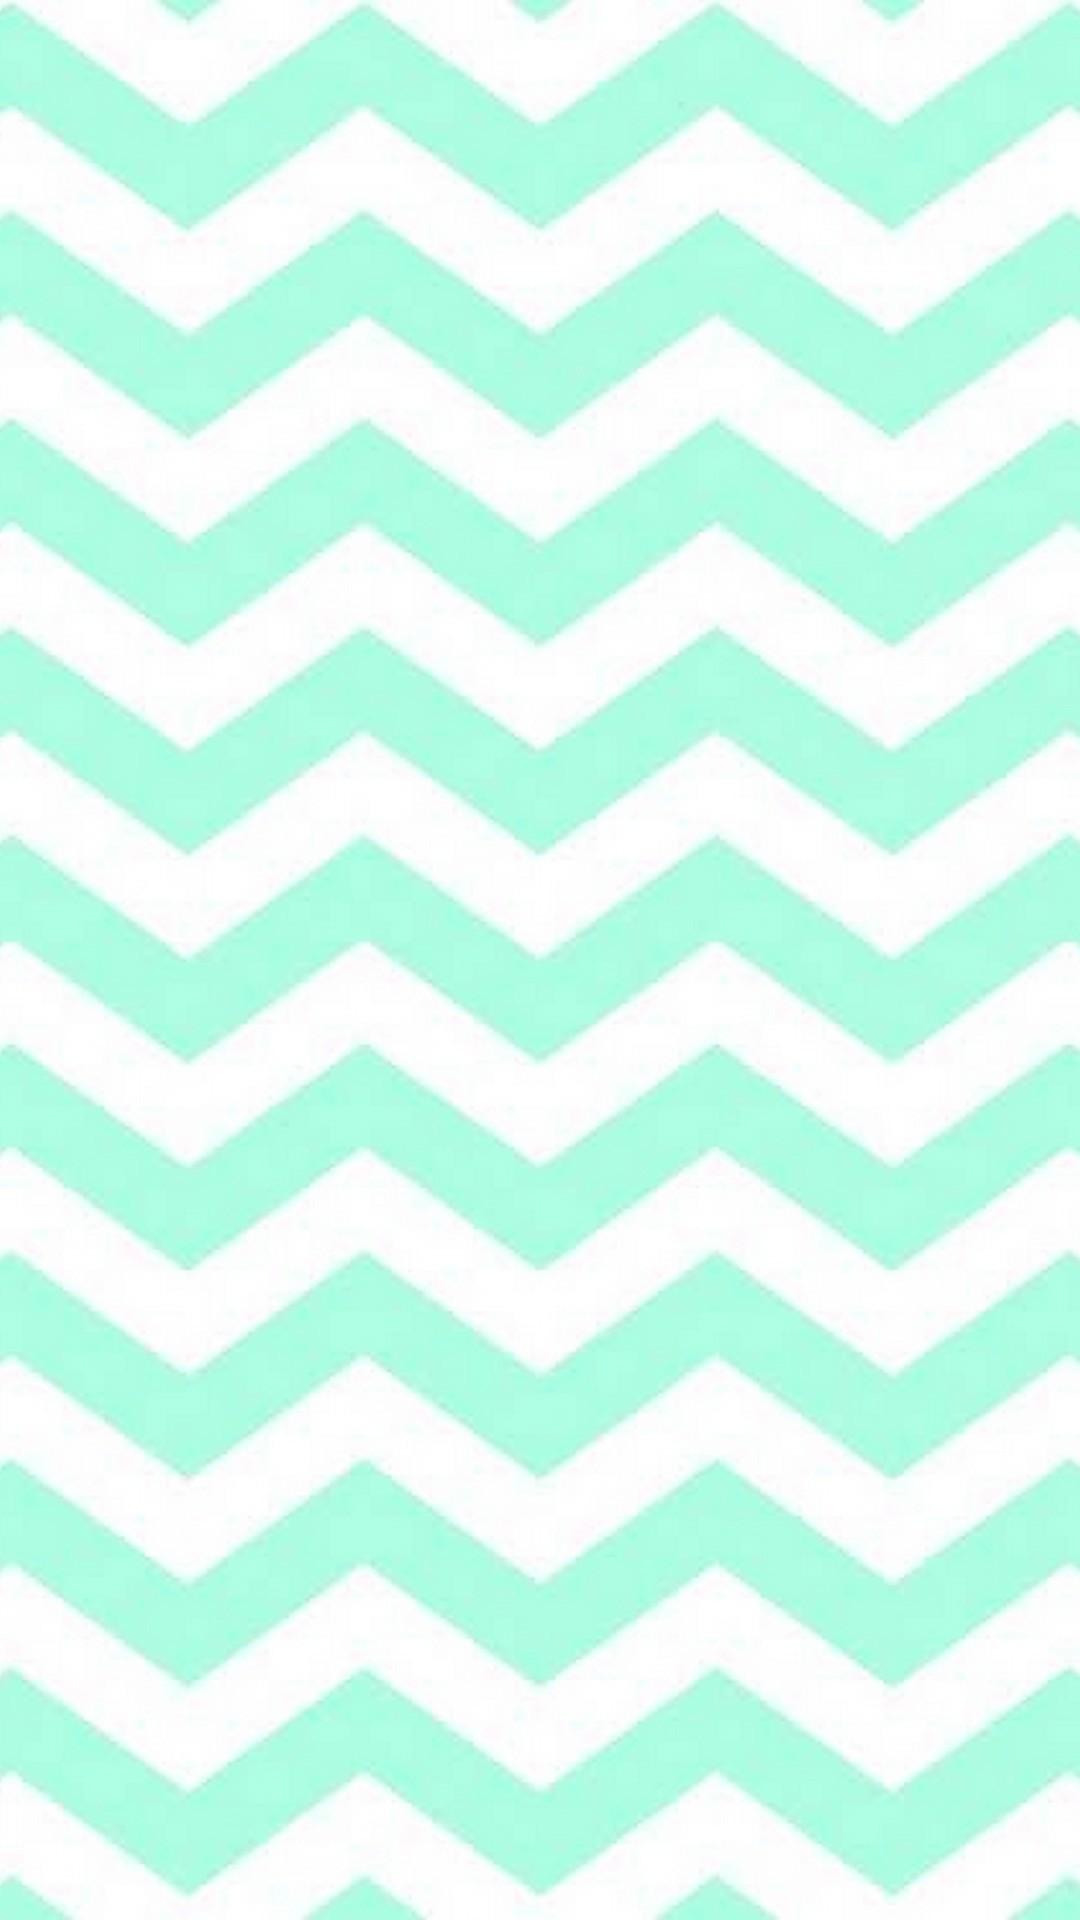 40 Mint Green Wallpaper Backgrounds For Iphone  Mint green wallpaper Mint  green aesthetic Mint green wallpaper iphone